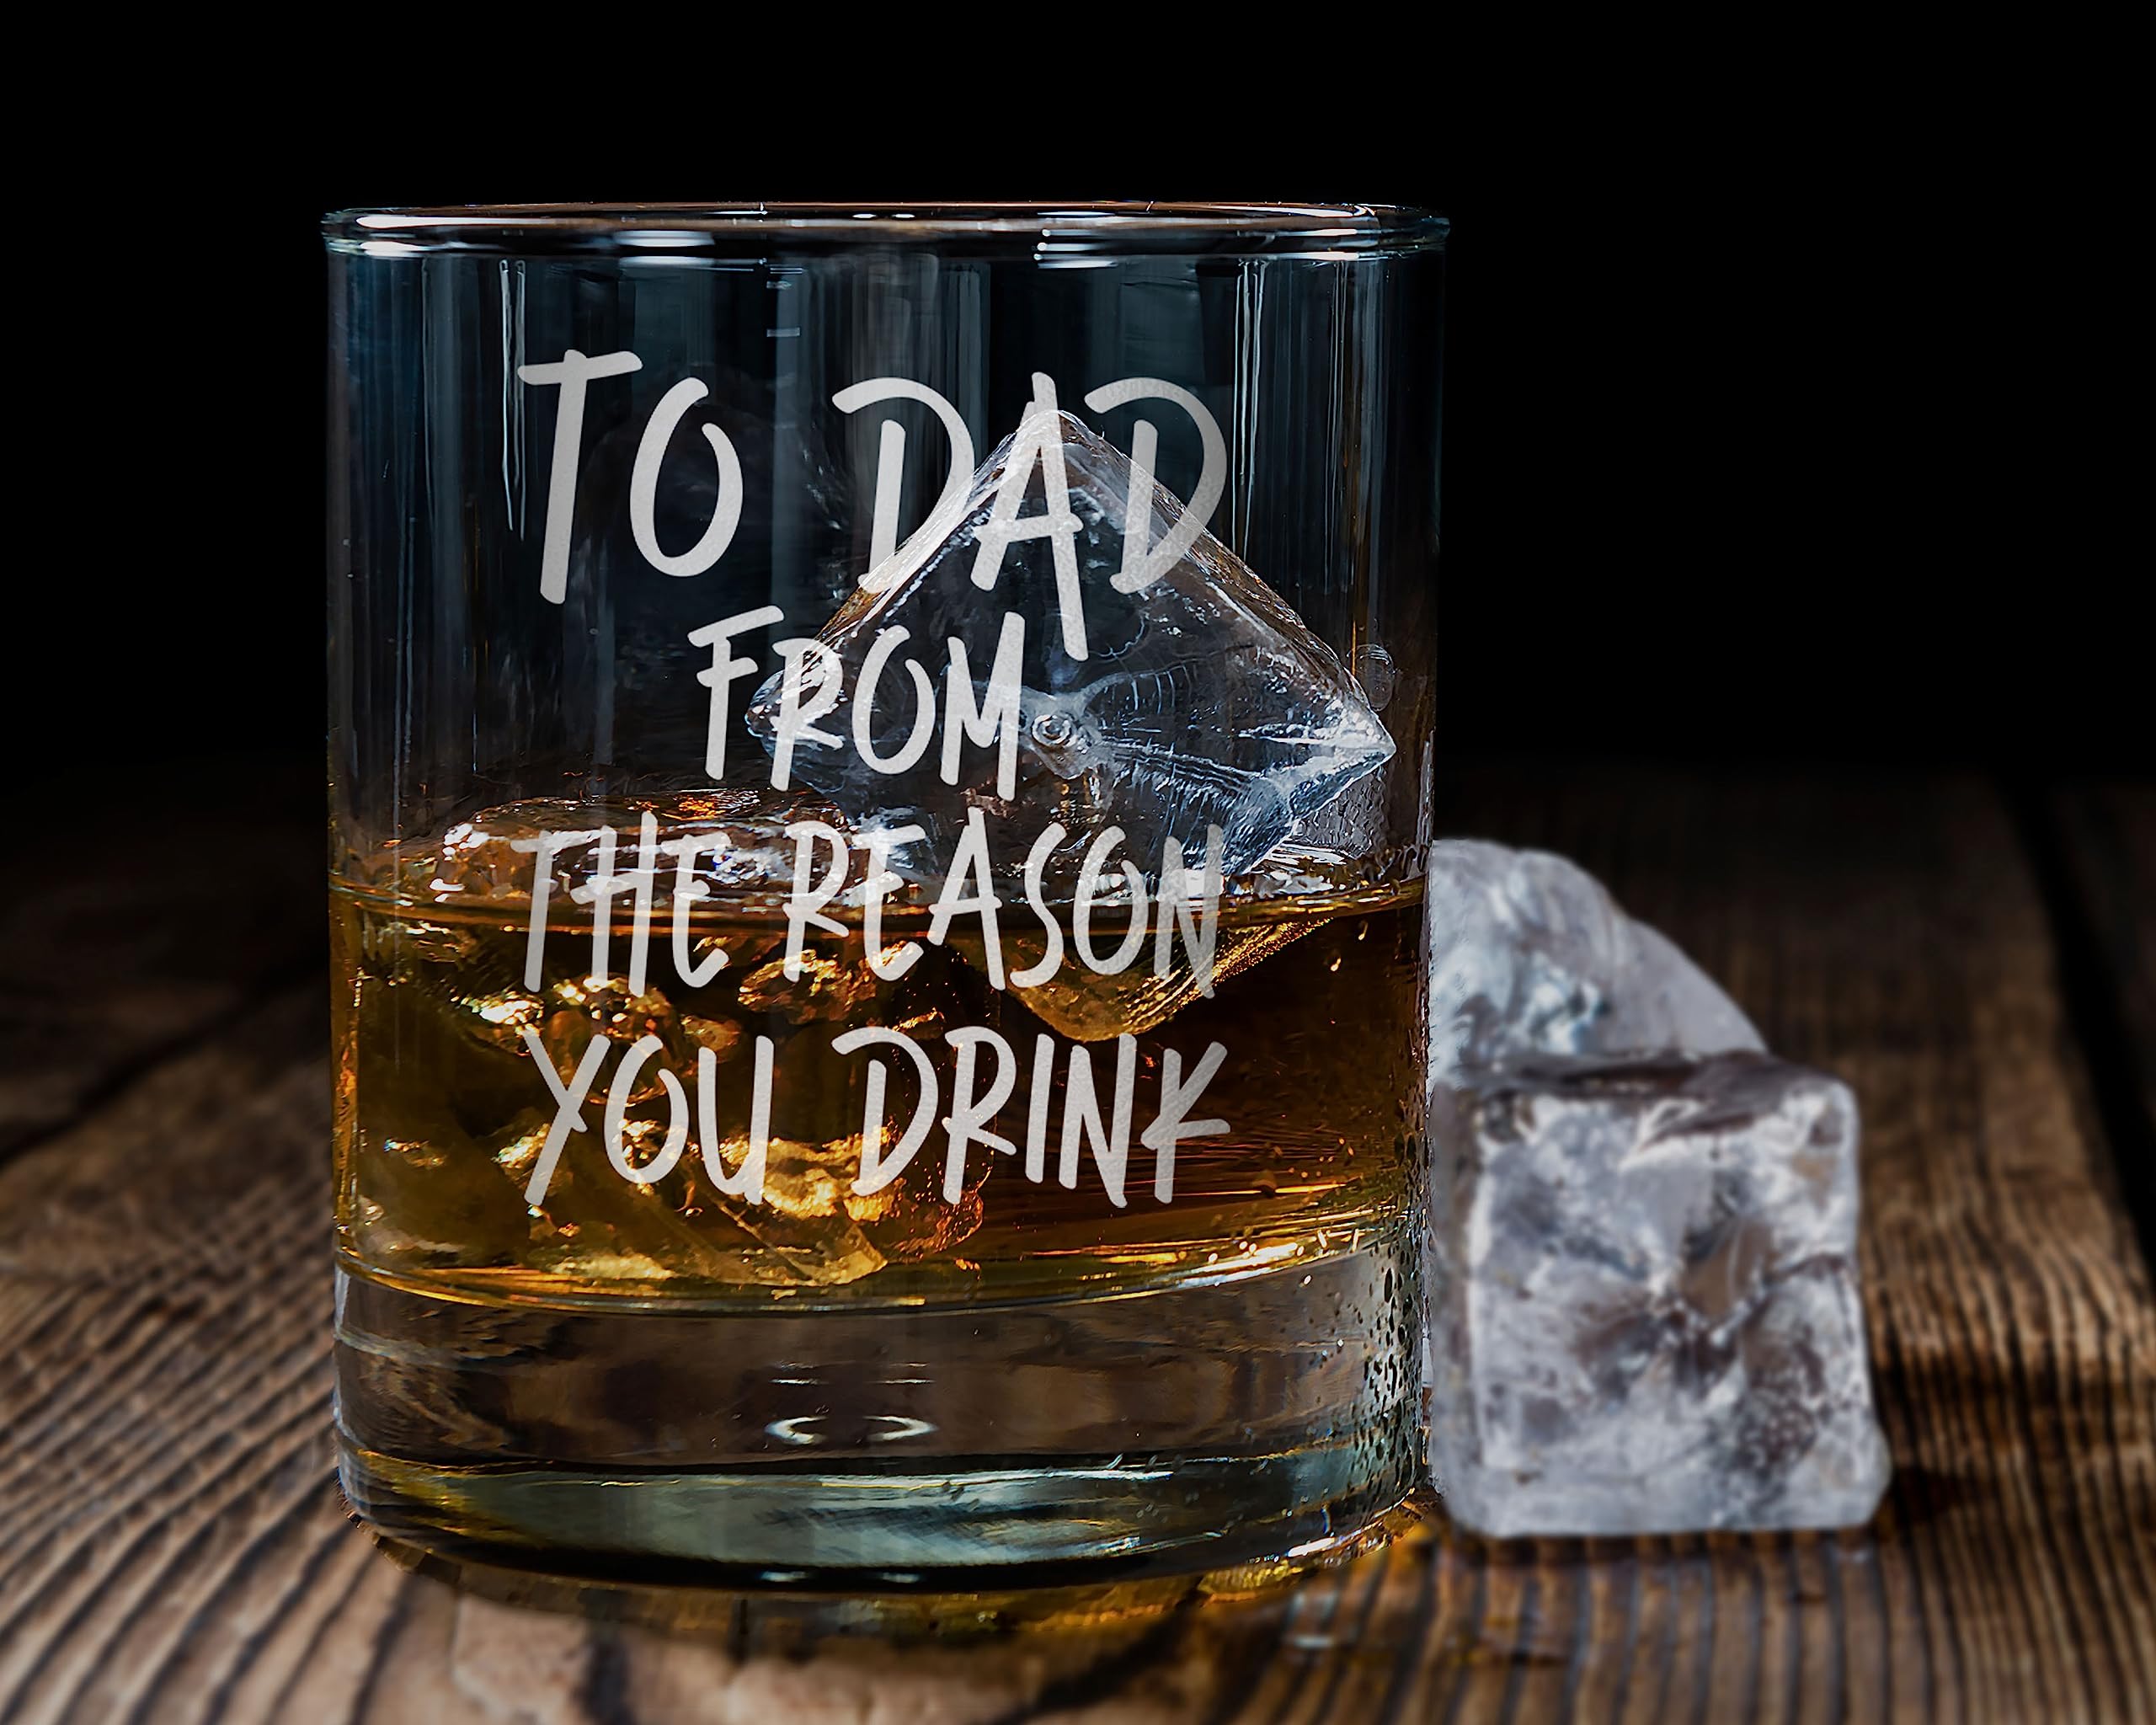 Promotion & Beyond TO DAD FROM THE REASON YOU DRINK Whiskey Glass - Funny Gift for Dad Uncle Grandpa From Daughter Son Wife - Father's Day